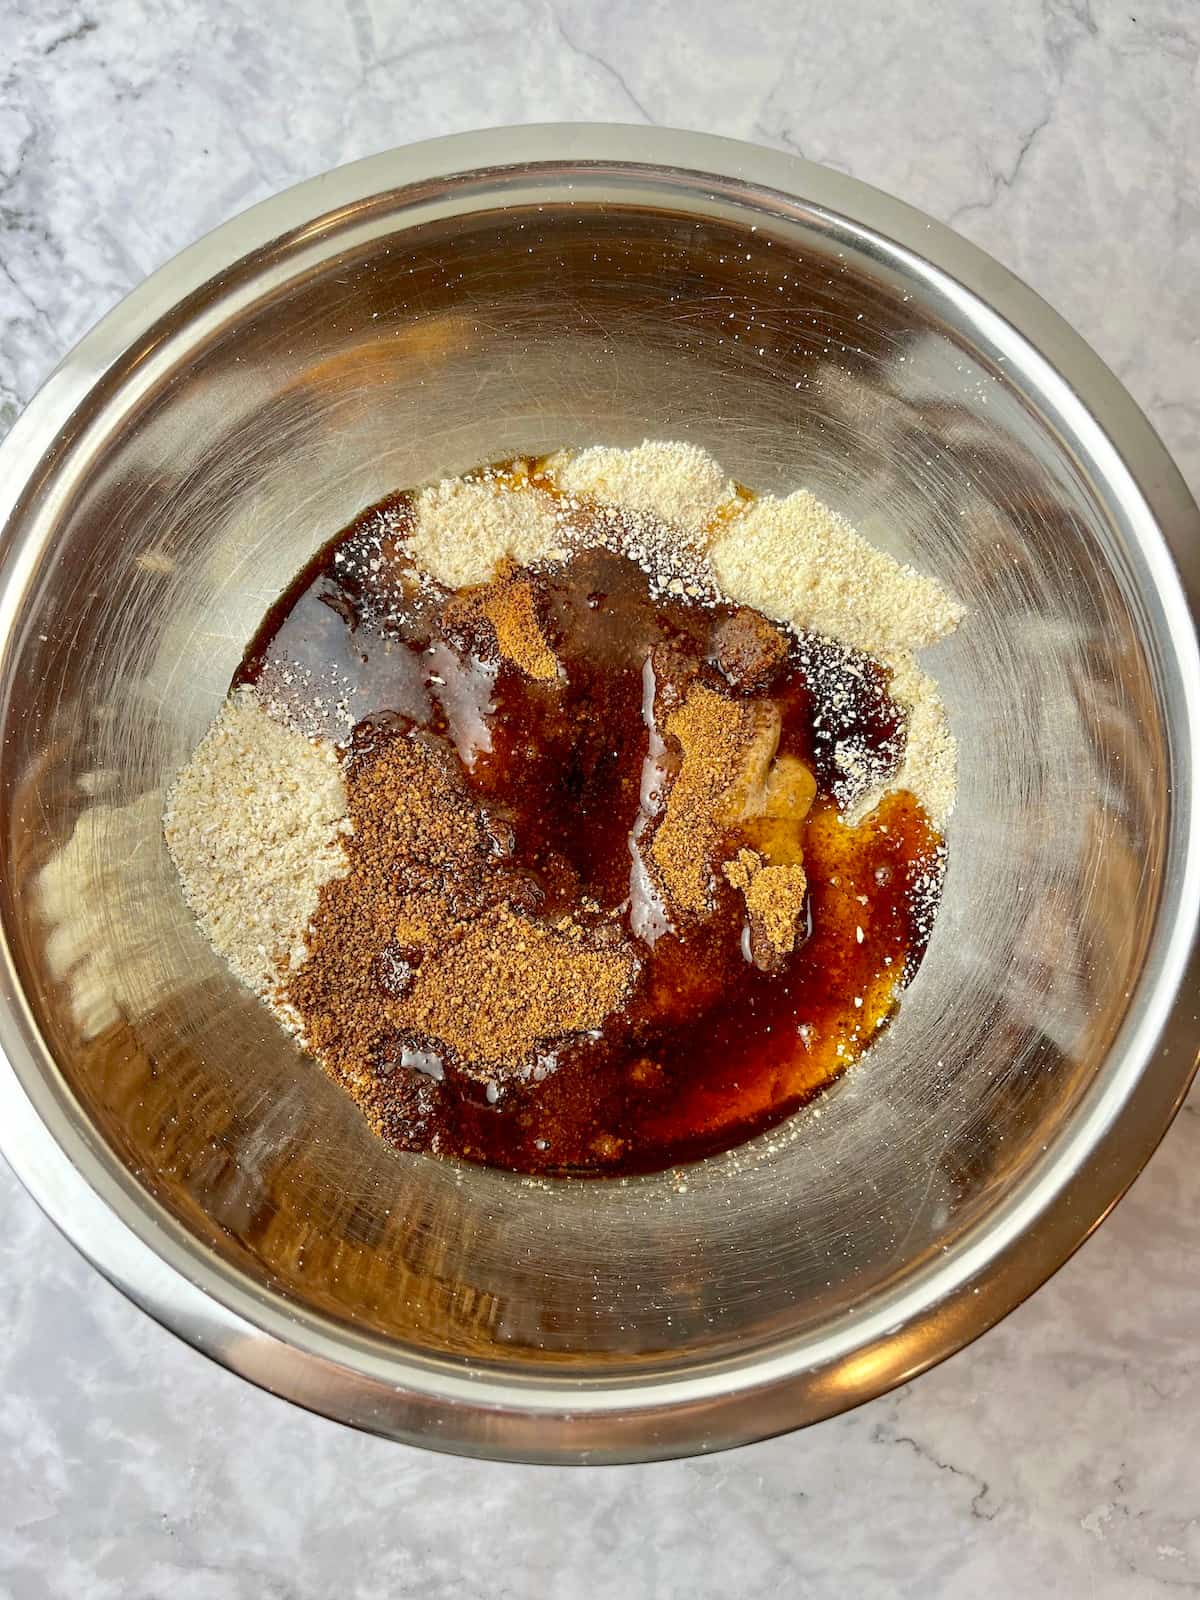 Vegan almond butter cookie ingredients in a mixing bowl.